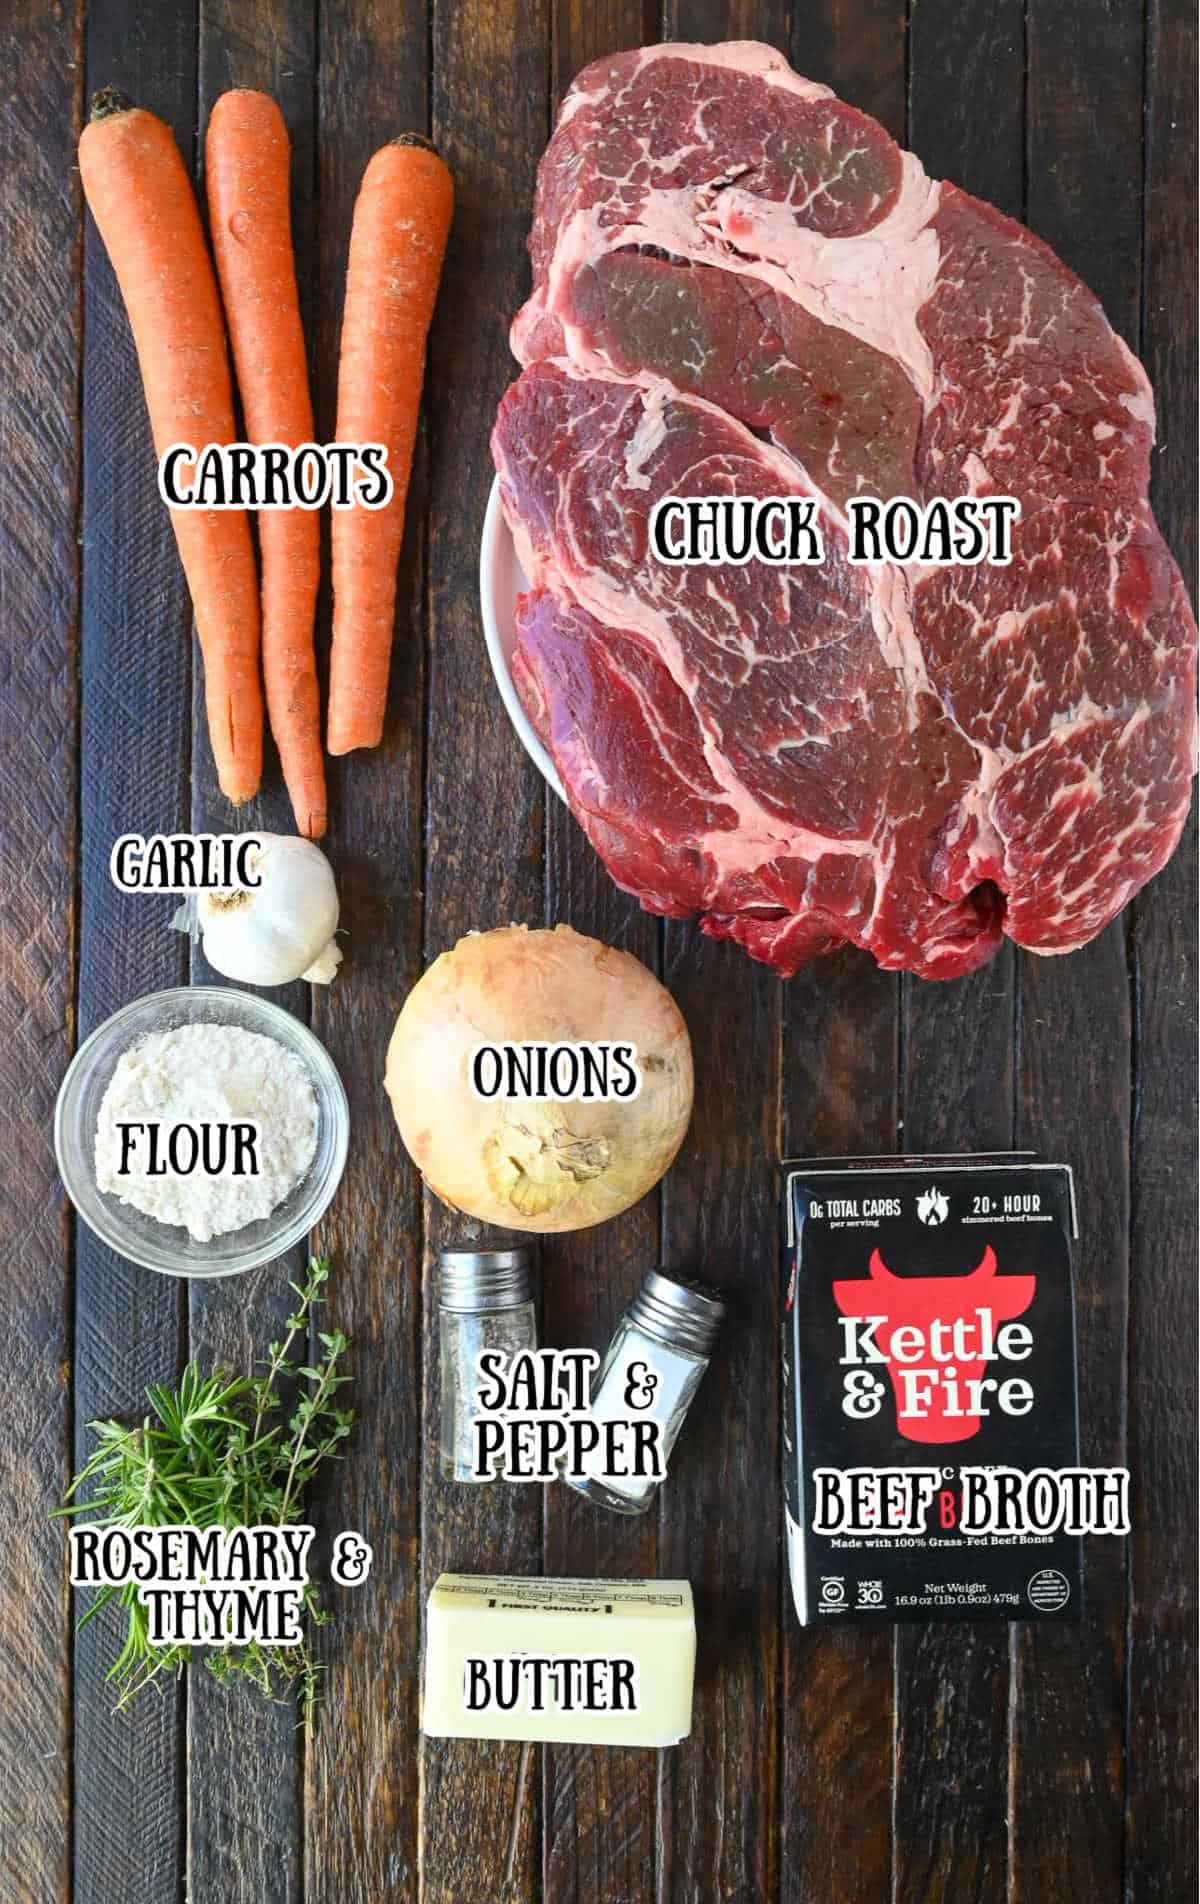 All the ingredients needed to make this pot roast.